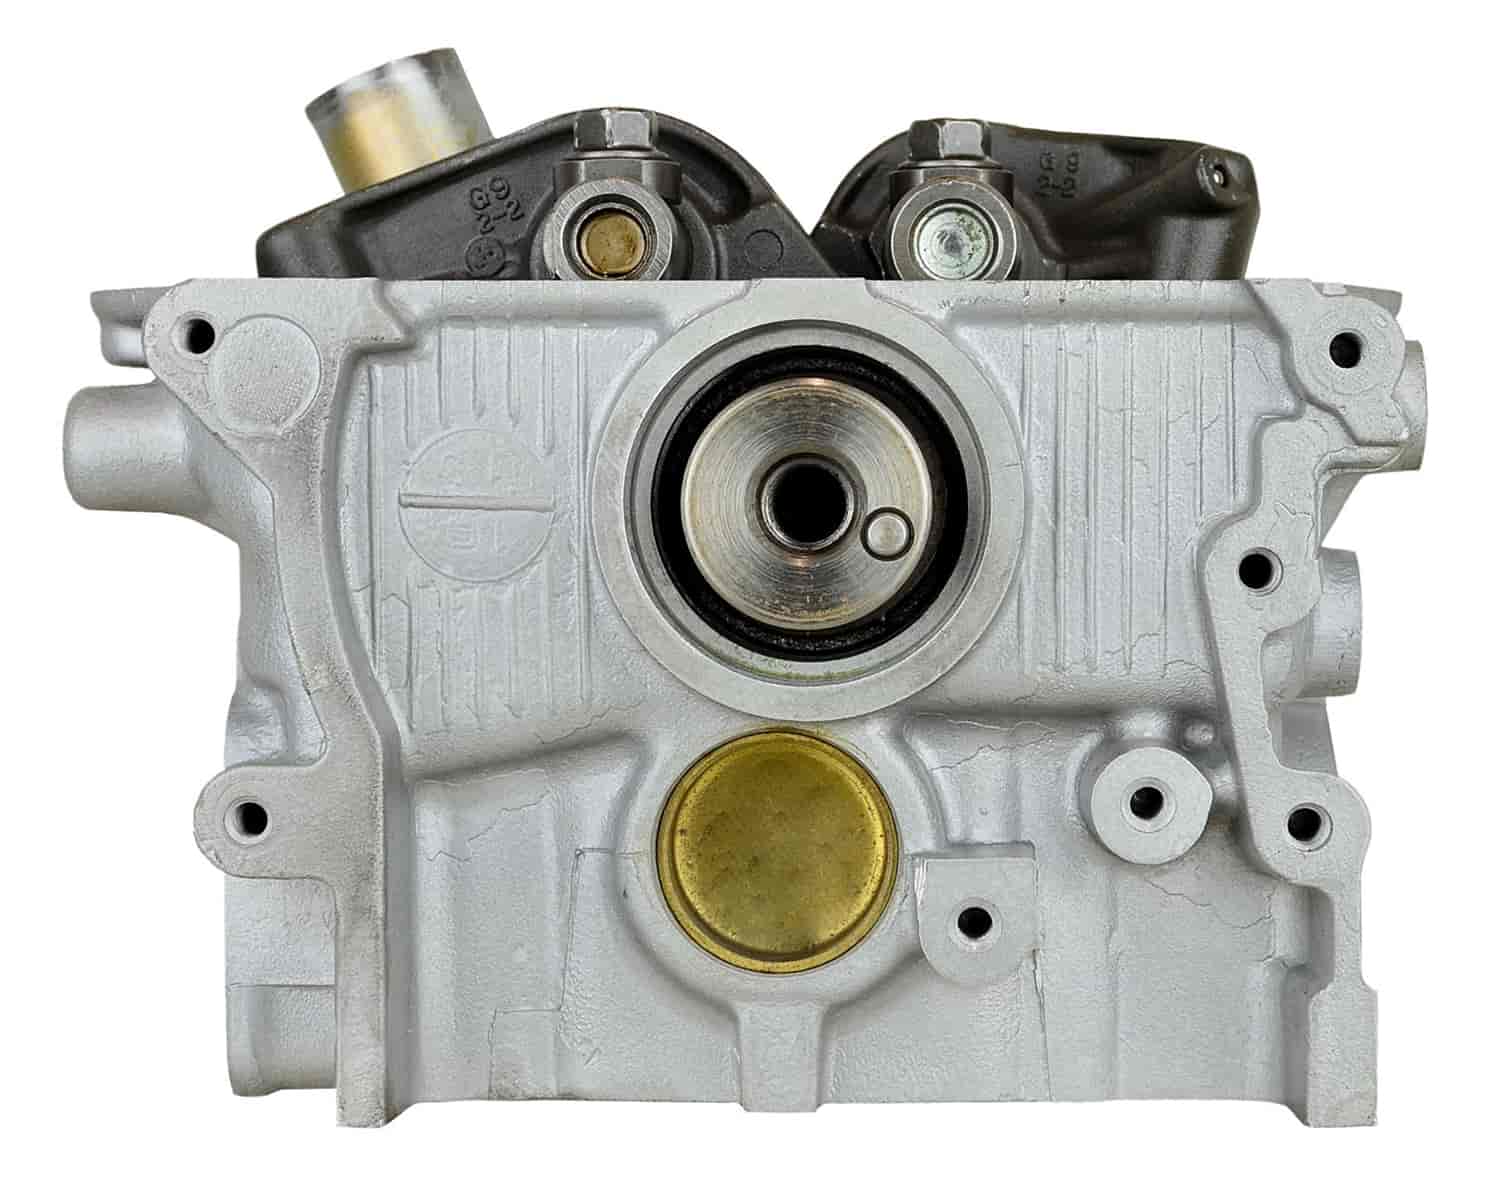 Remanufactured Cylinder Head for 1997-2002 Mitsubishi Mirage with